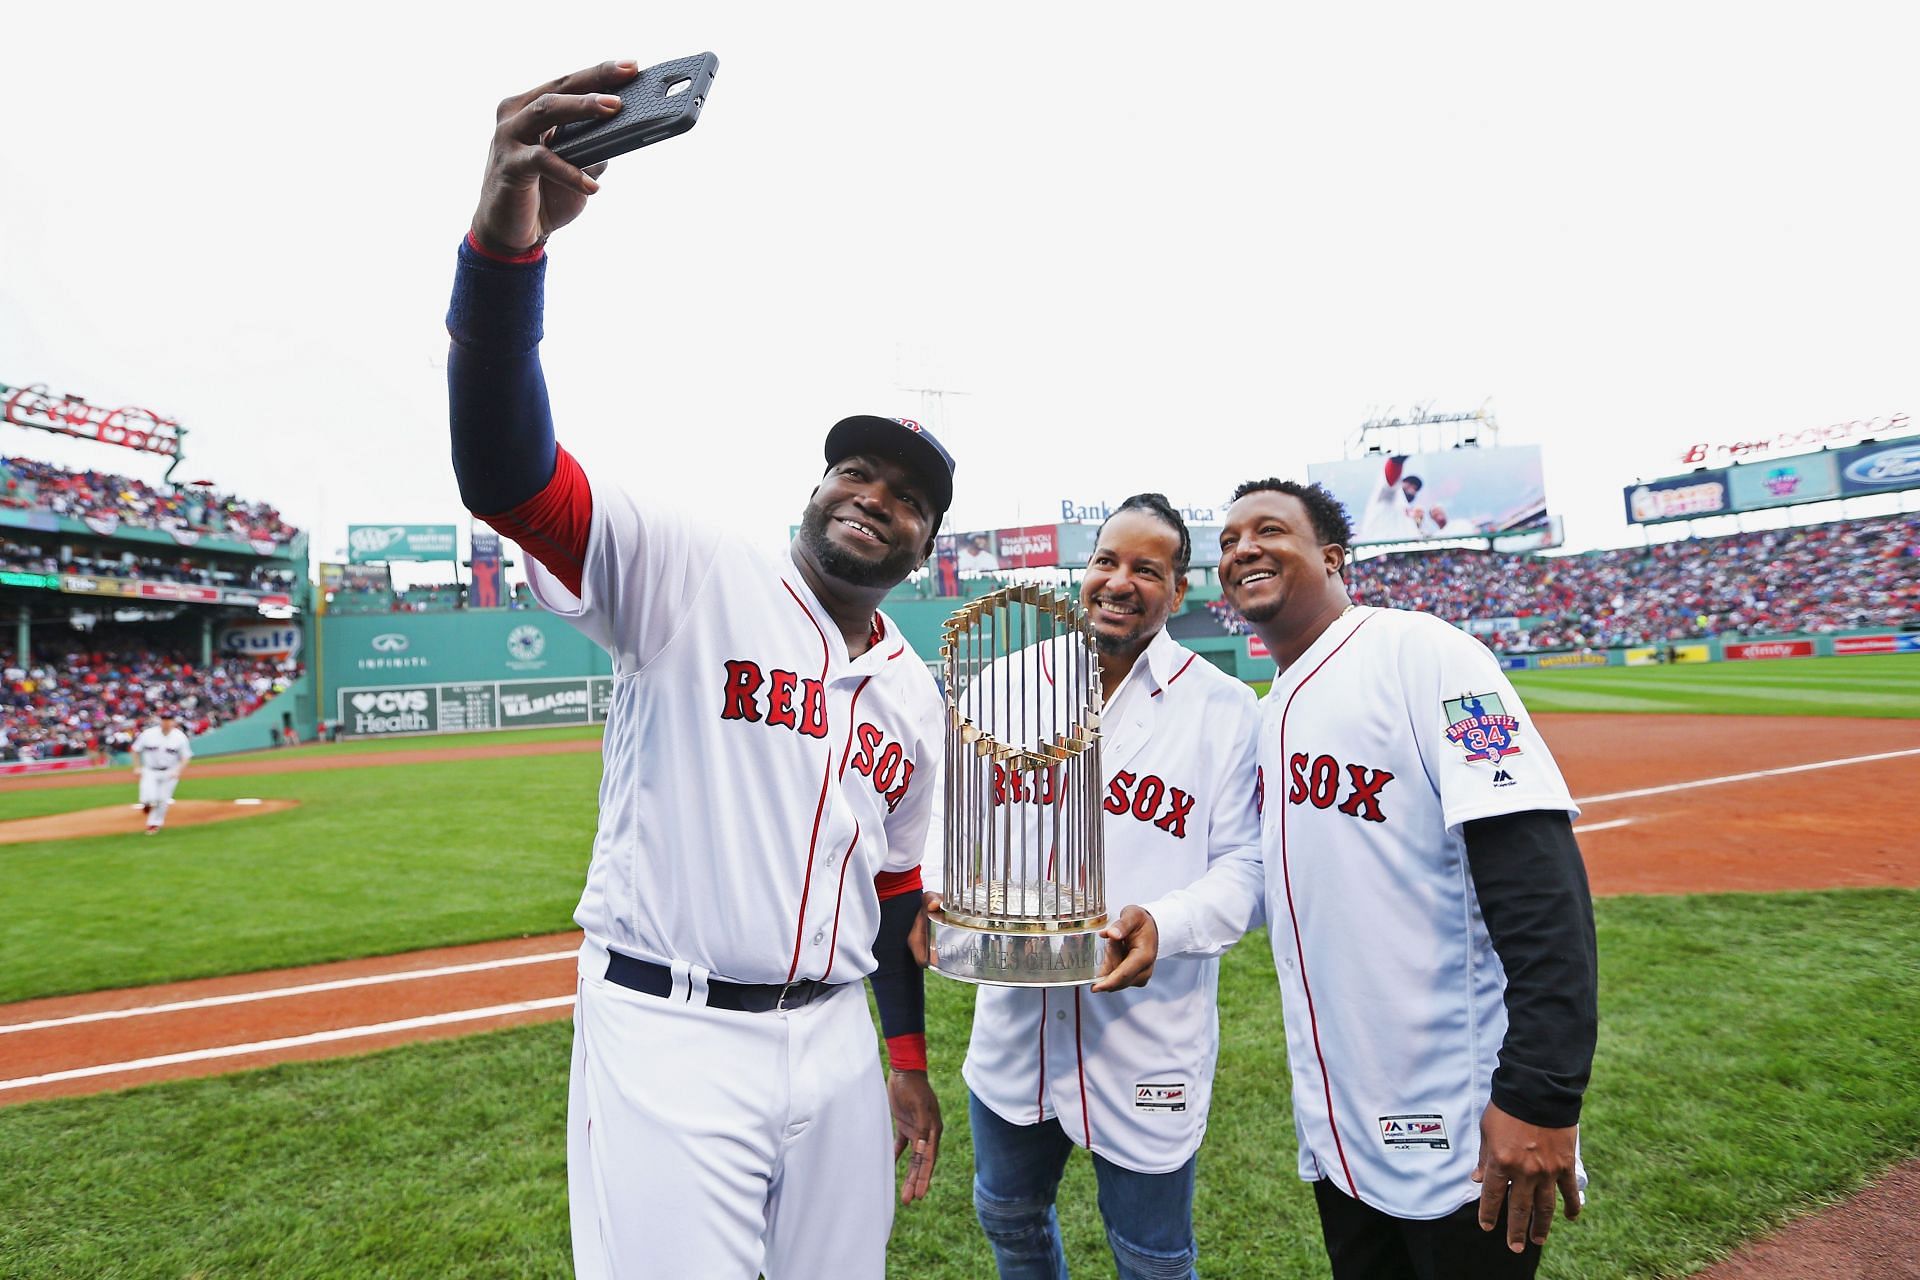 Manny Ramirez posing with the 2004 world series trophy.